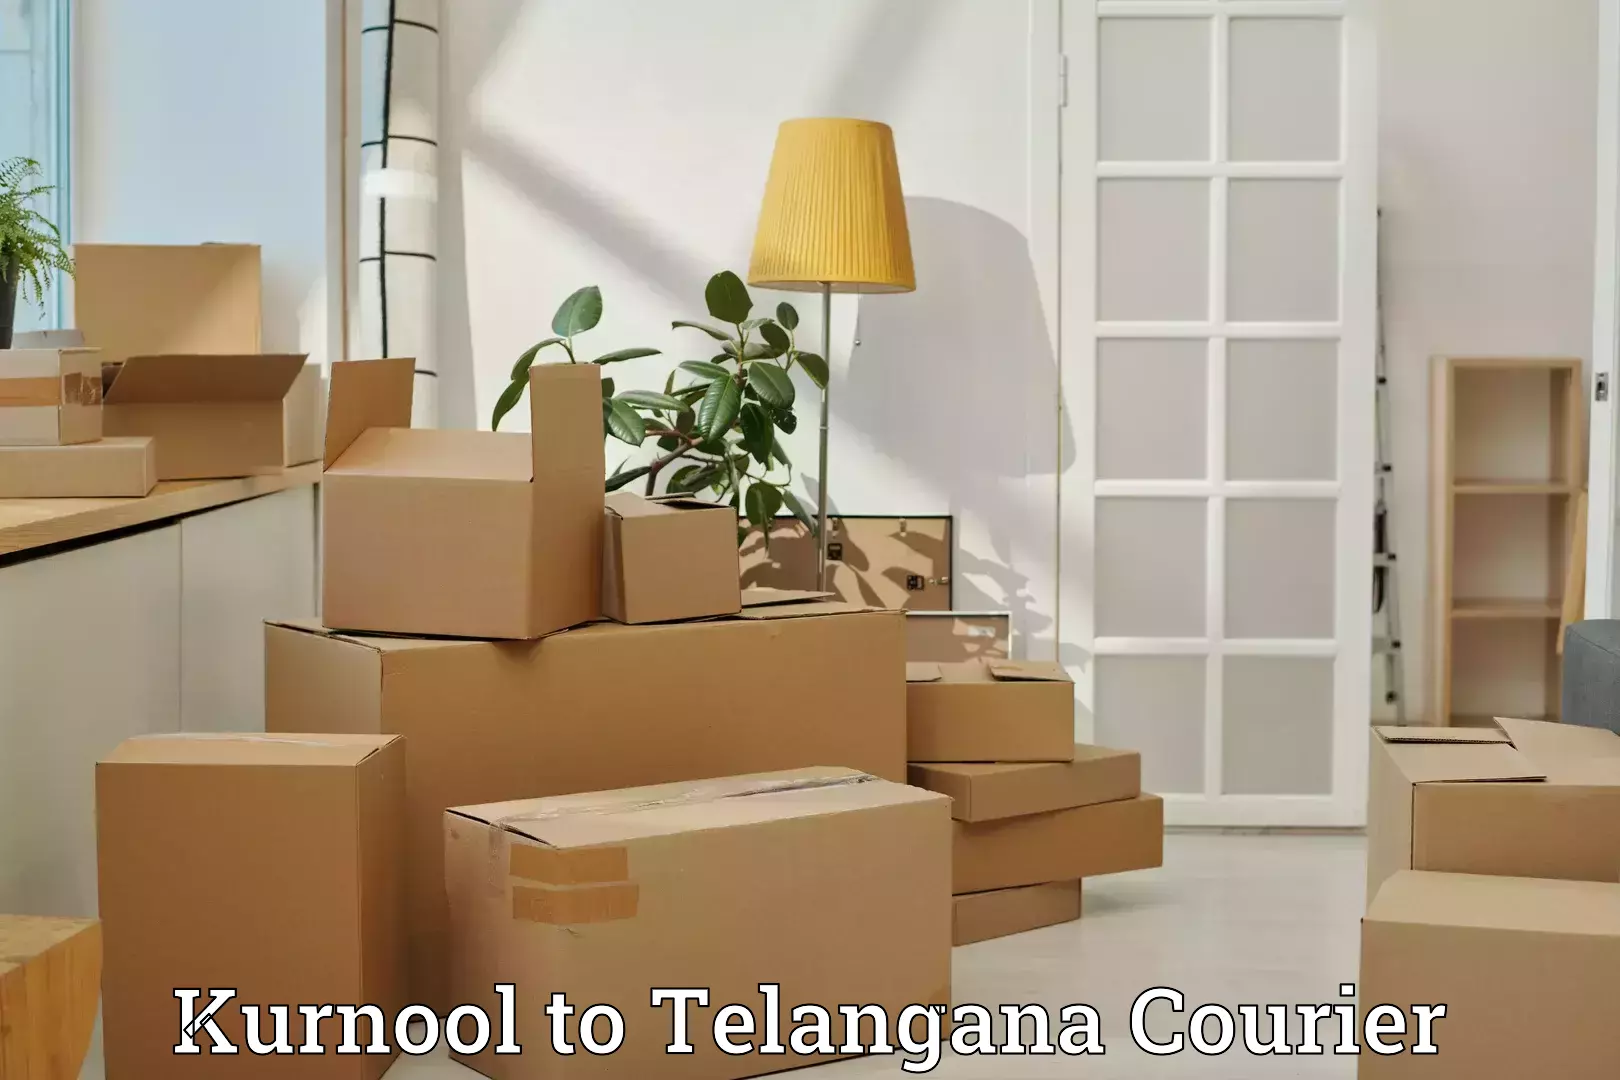 Personal luggage delivery in Kurnool to Secunderabad